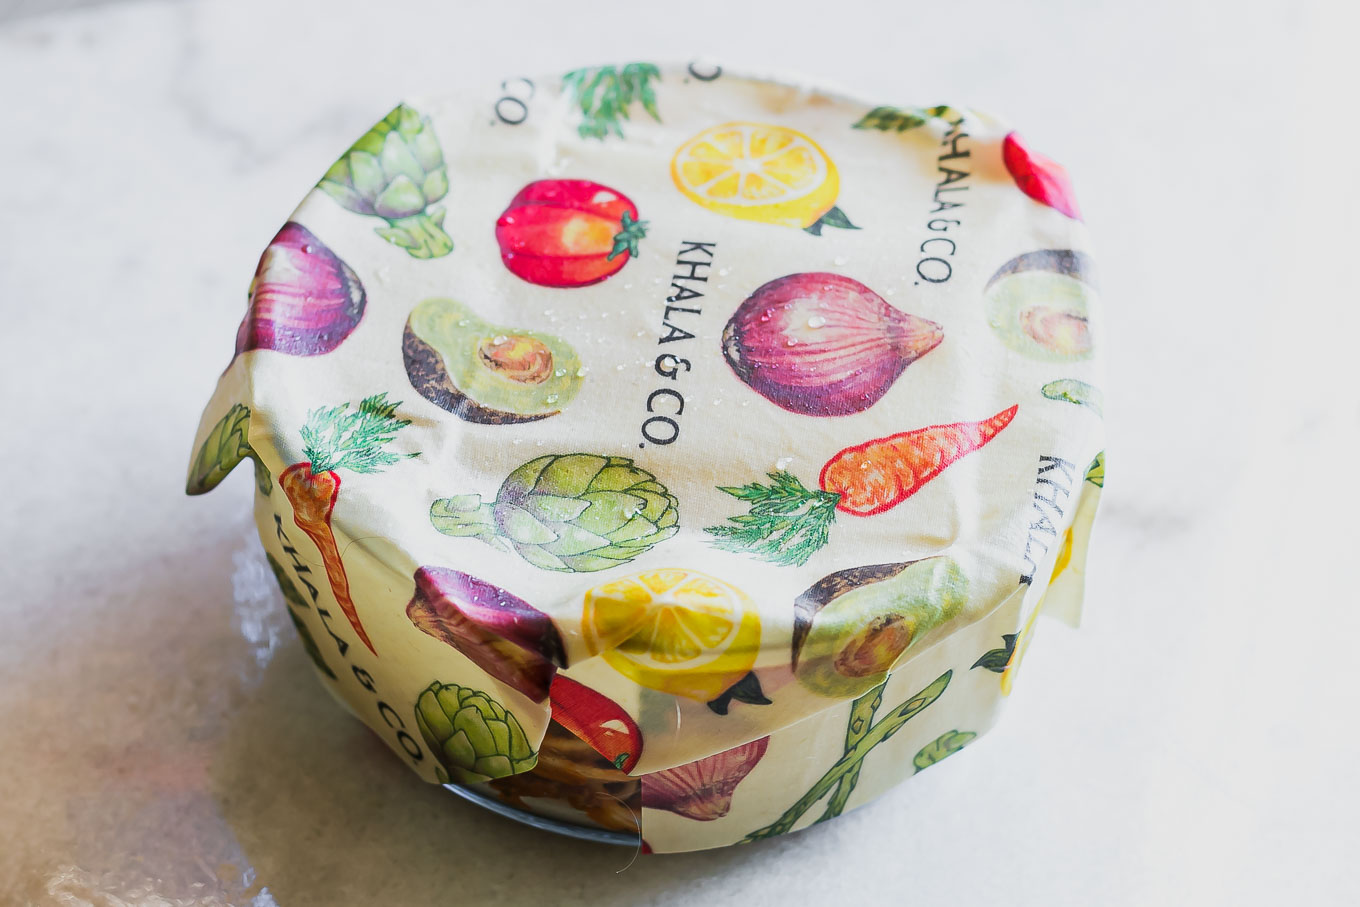 Reusable food wraps: why it's time to ditch plastic wrap